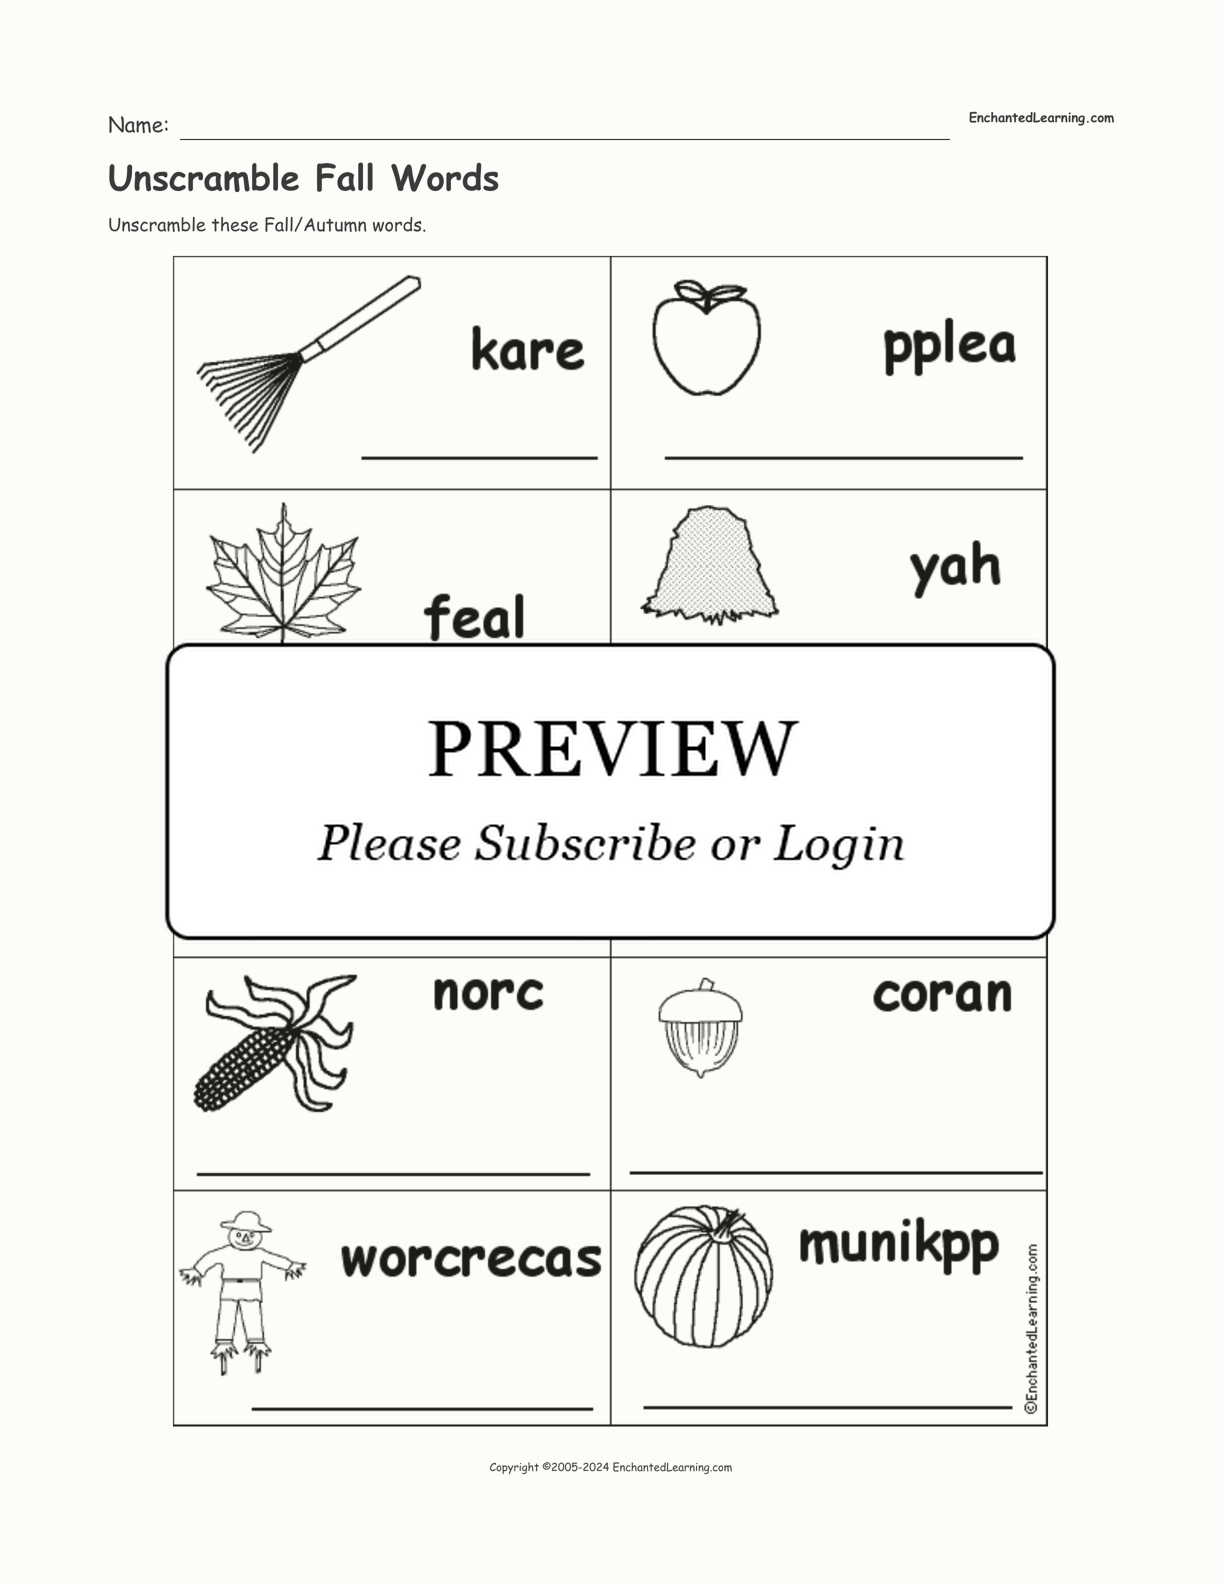 Unscramble Fall Words interactive worksheet page 1